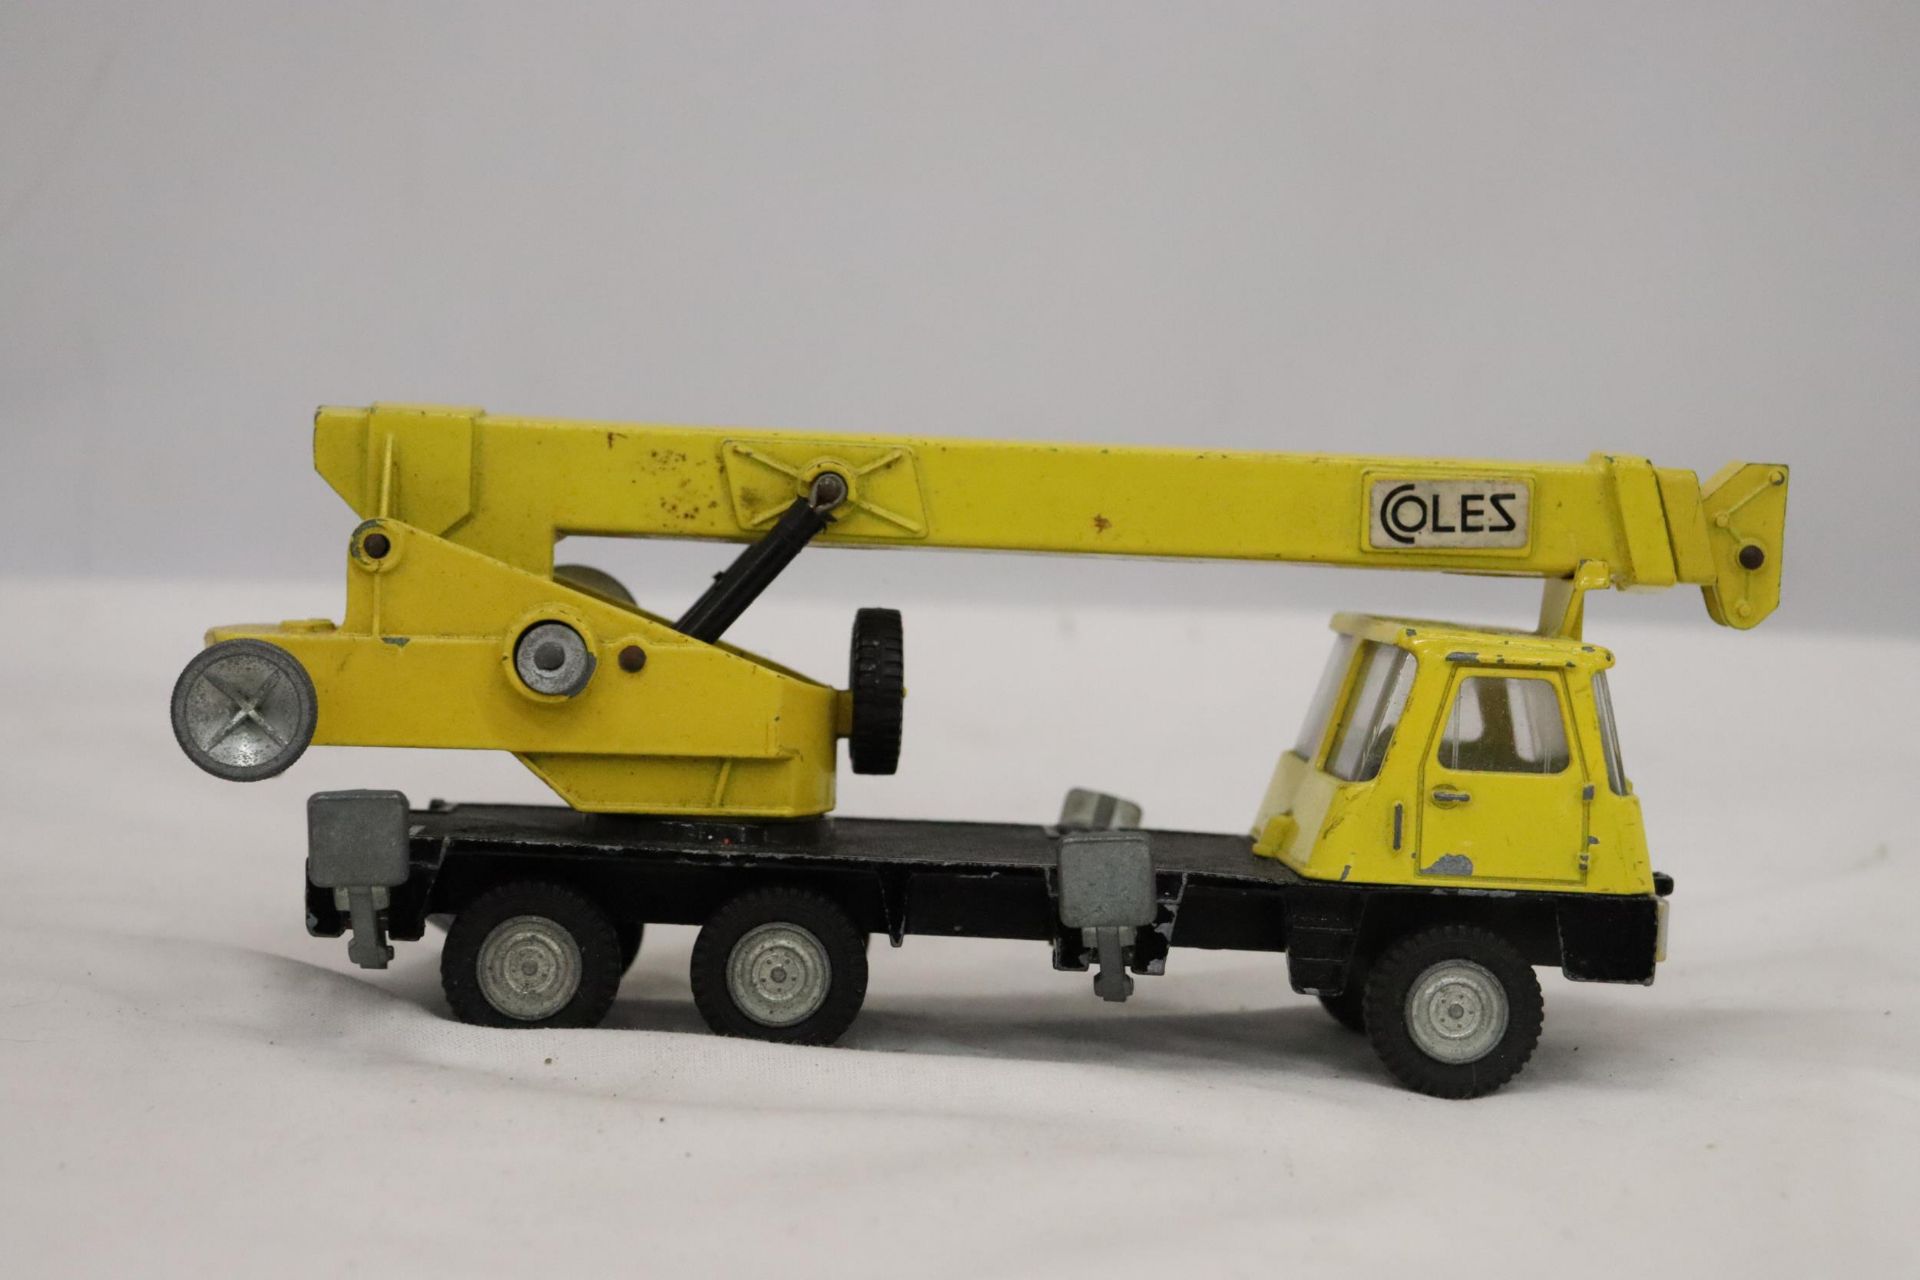 A COLES HYDRA TRUCK 150T MADE BY DINKY TOYS - Image 4 of 5